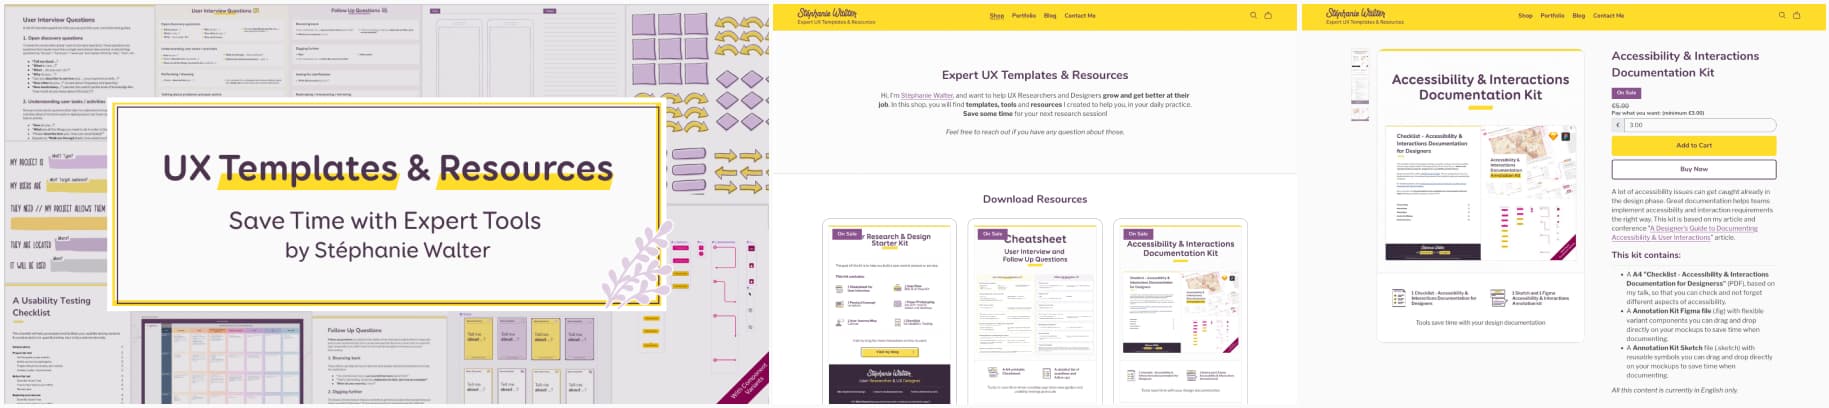 Screenshots of the shop that has the same visual identity as my site. The text says "UX Templates & Resources, save time with expert tools by Stéphanie Walter"